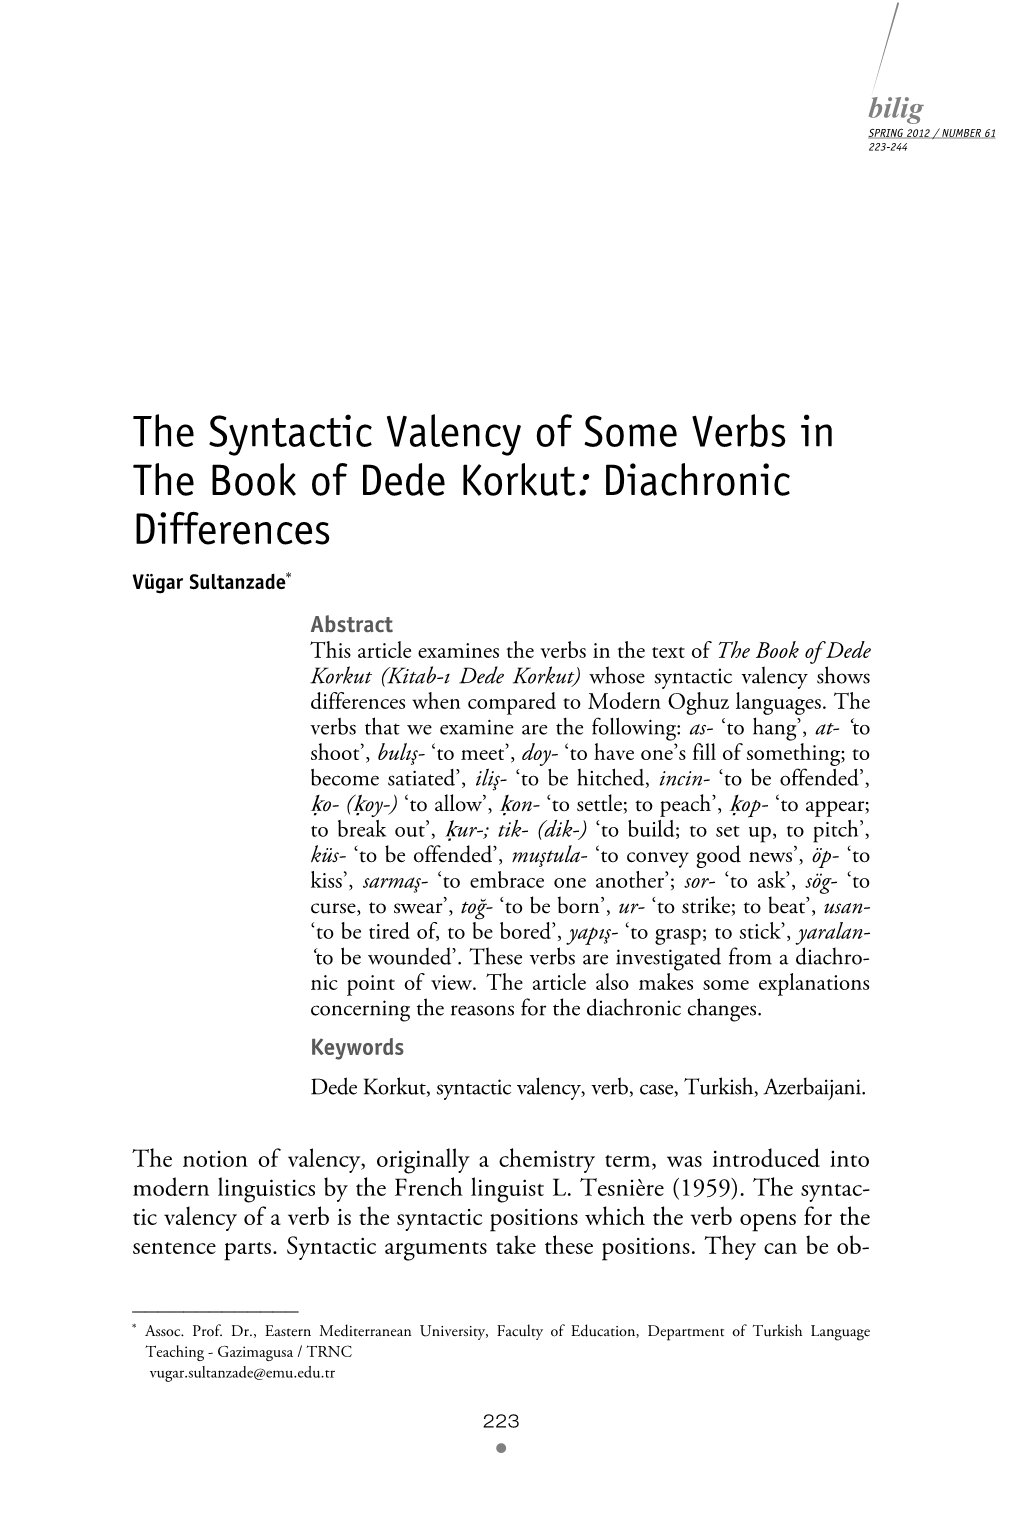 The Syntactic Valency of Some Verbs in the Book of Dede Korkut